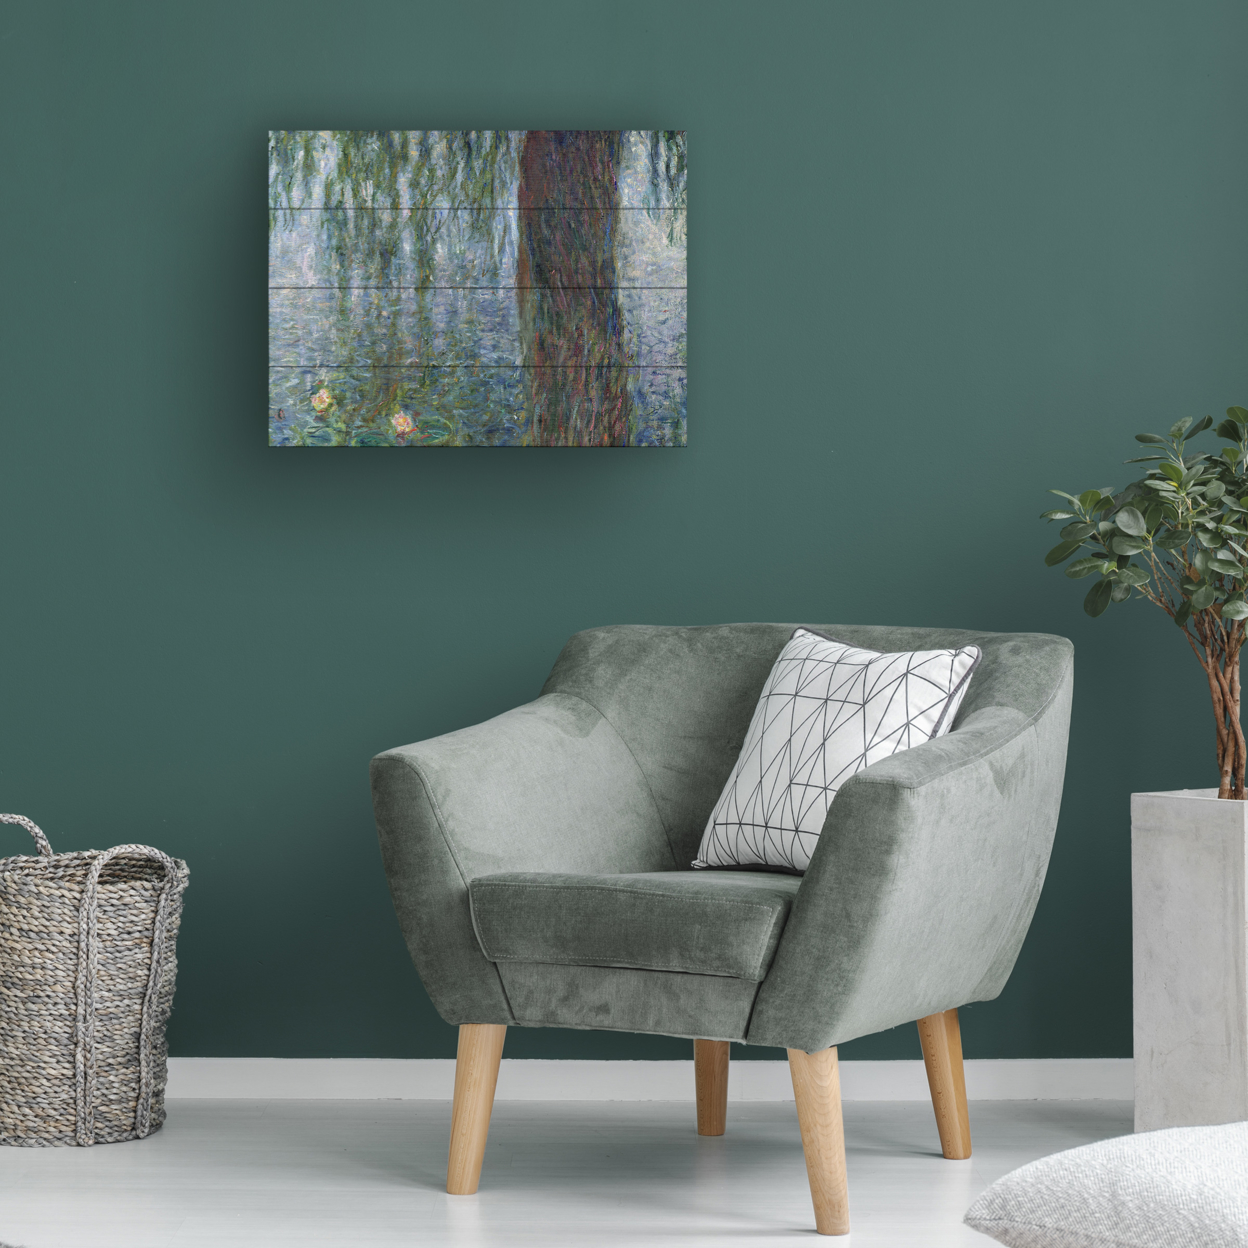 Wall Art 12 X 16 Inches Titled Waterlillies Morning Ready To Hang Printed On Wooden Planks